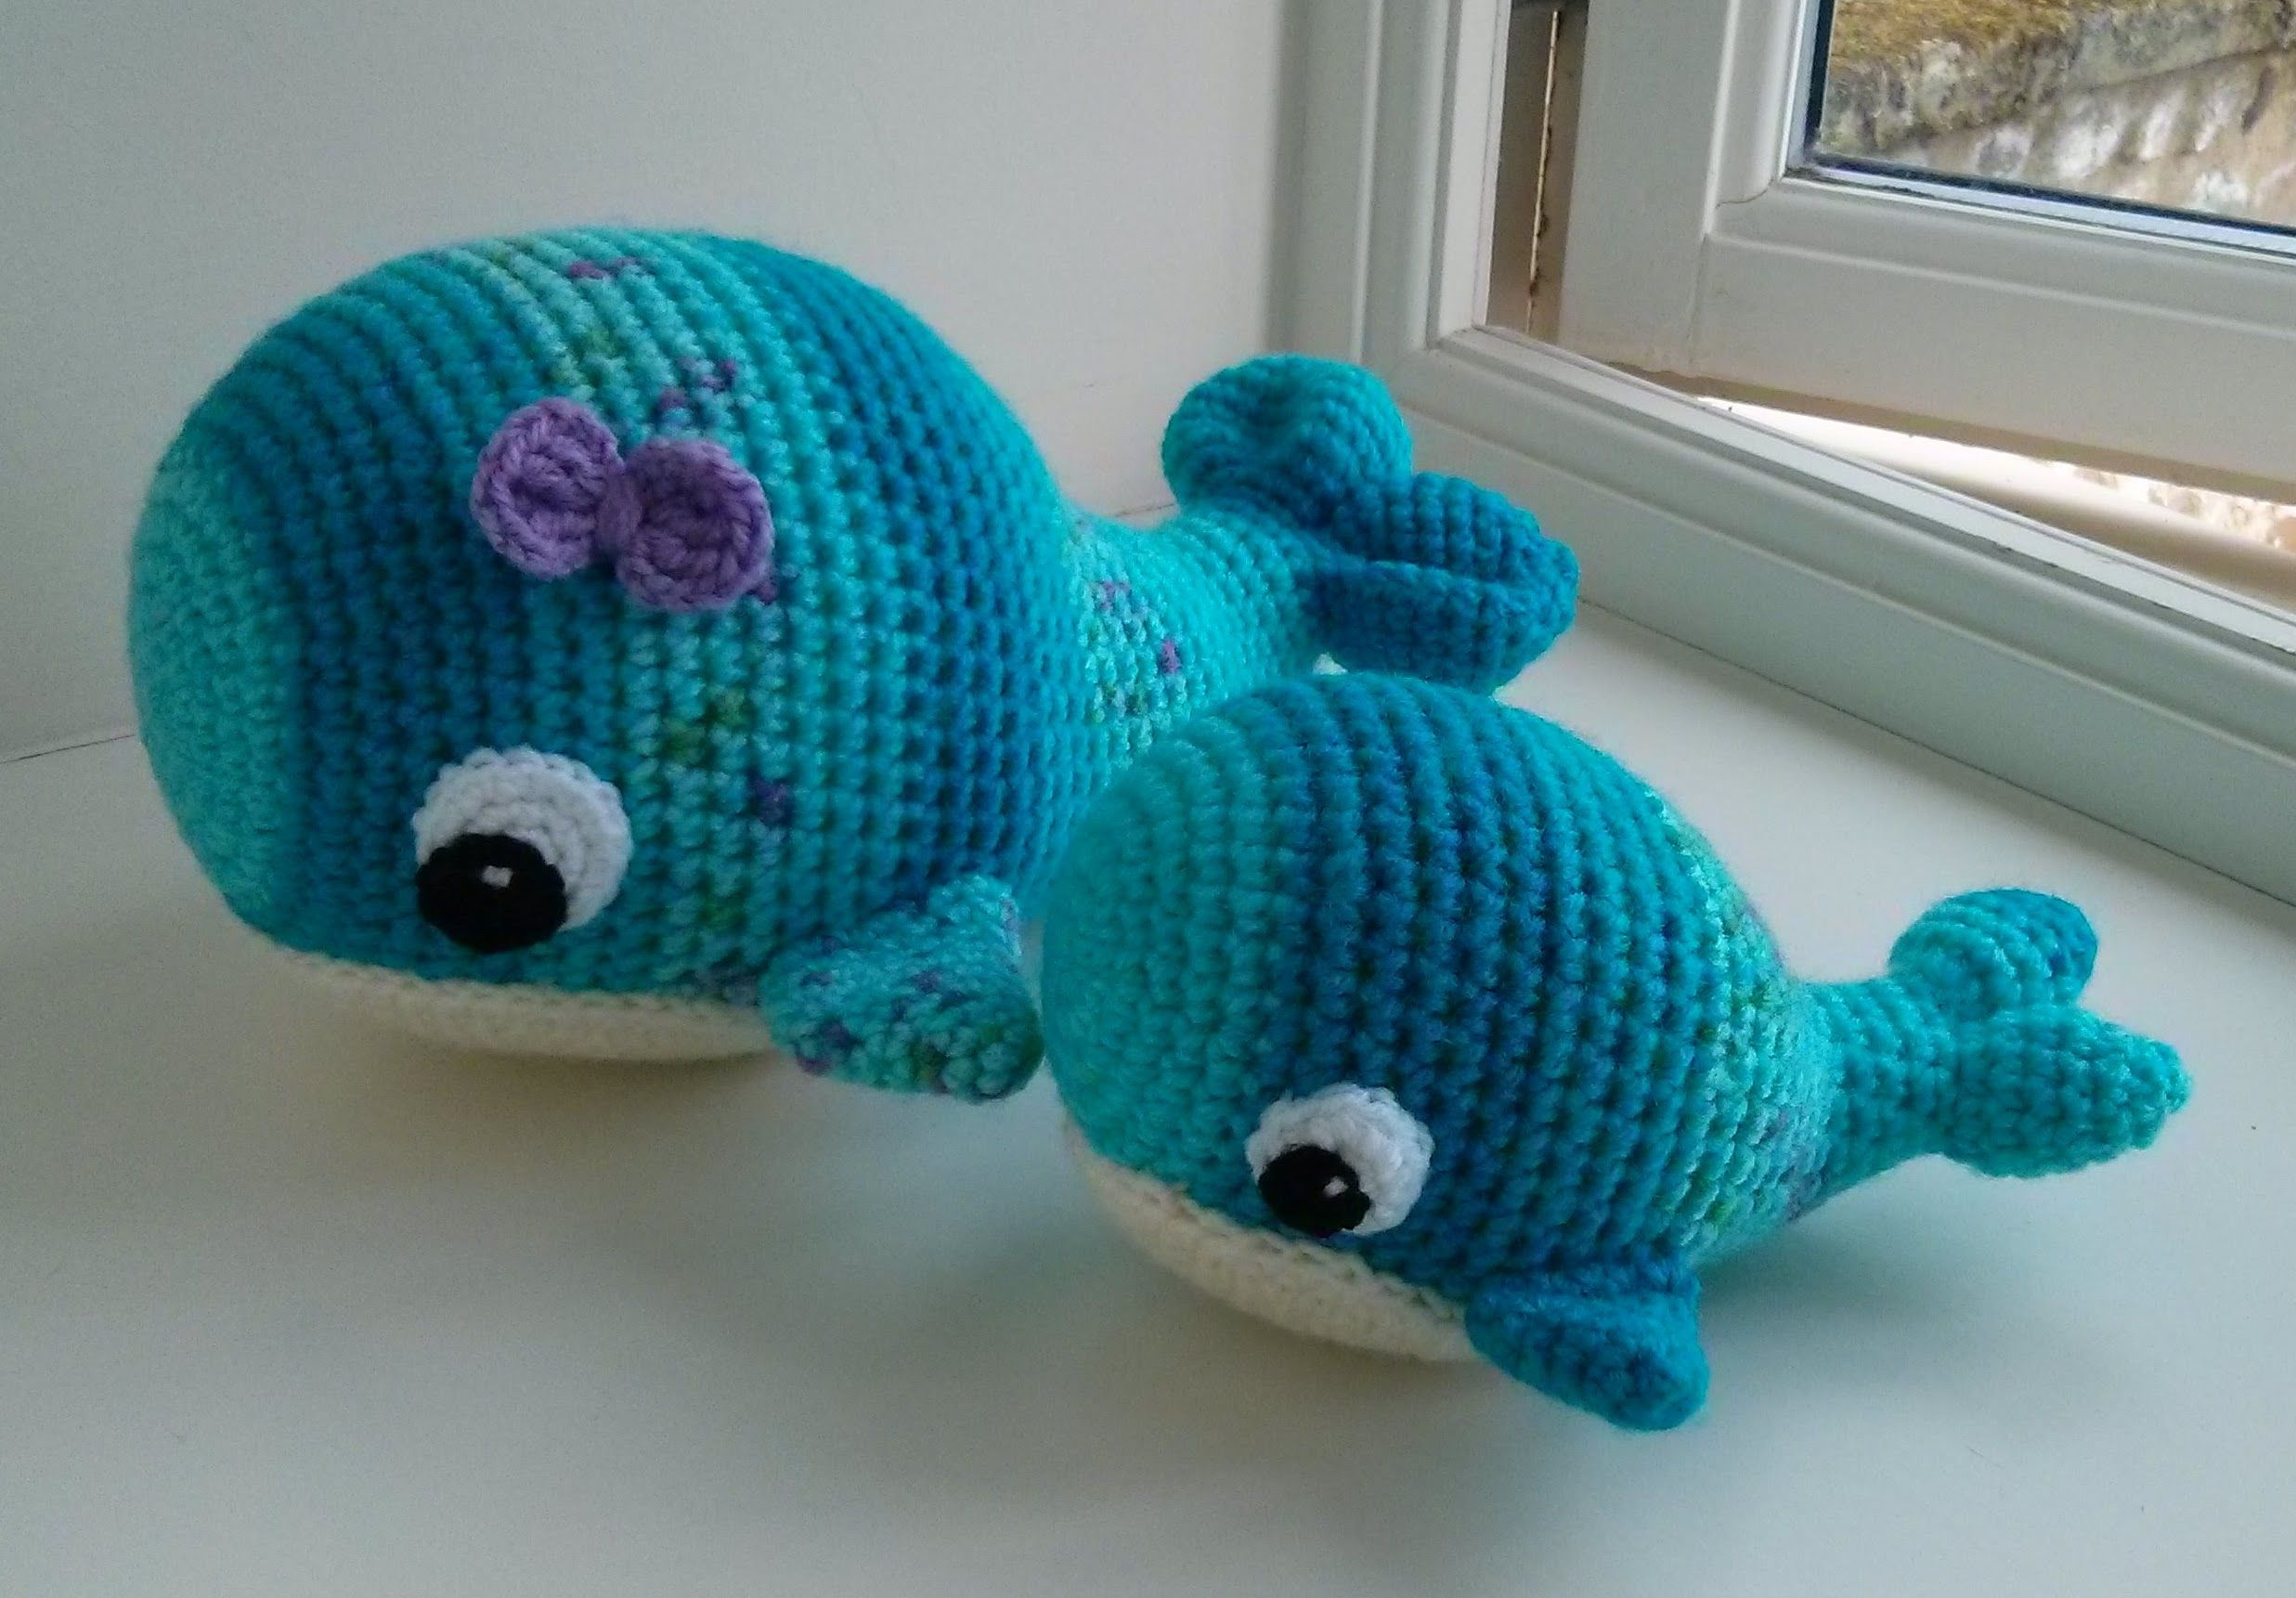 Crochet Whale Pattern Willa The Whale Smaller One Is From The Lovey Version One And